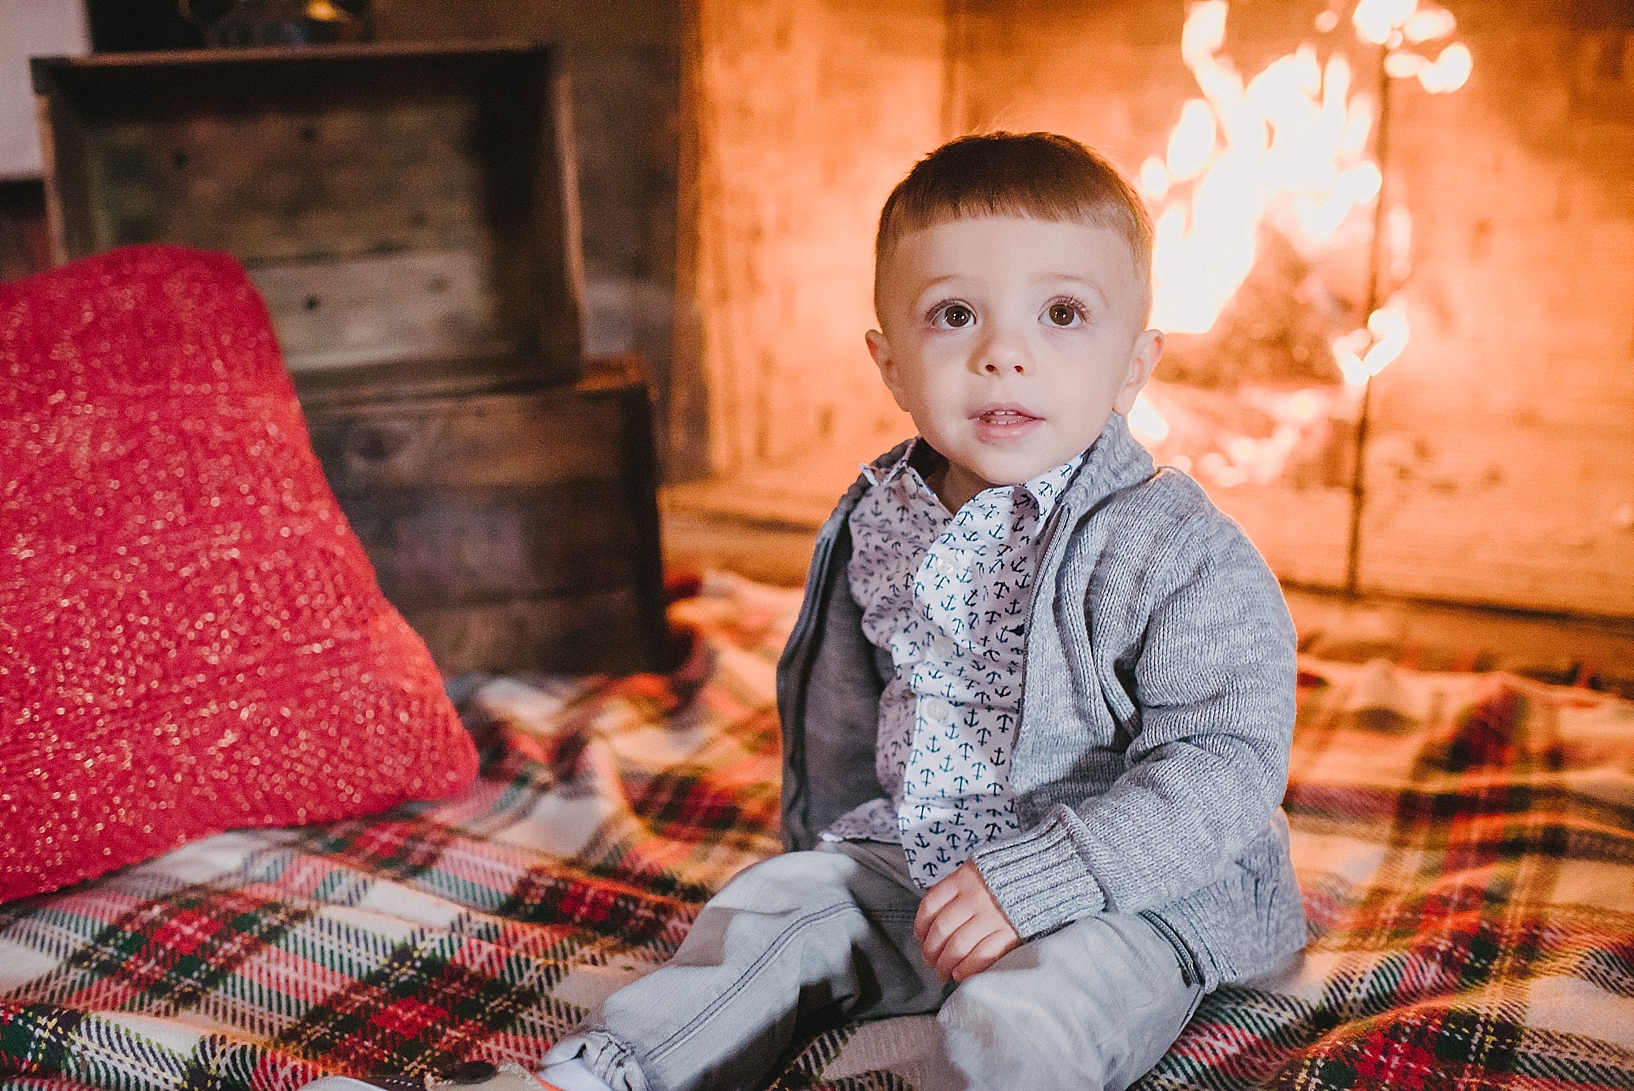 little boy in grey cardigan and button down dress shirt sitting in front of crackling fireplace on plaid blanket